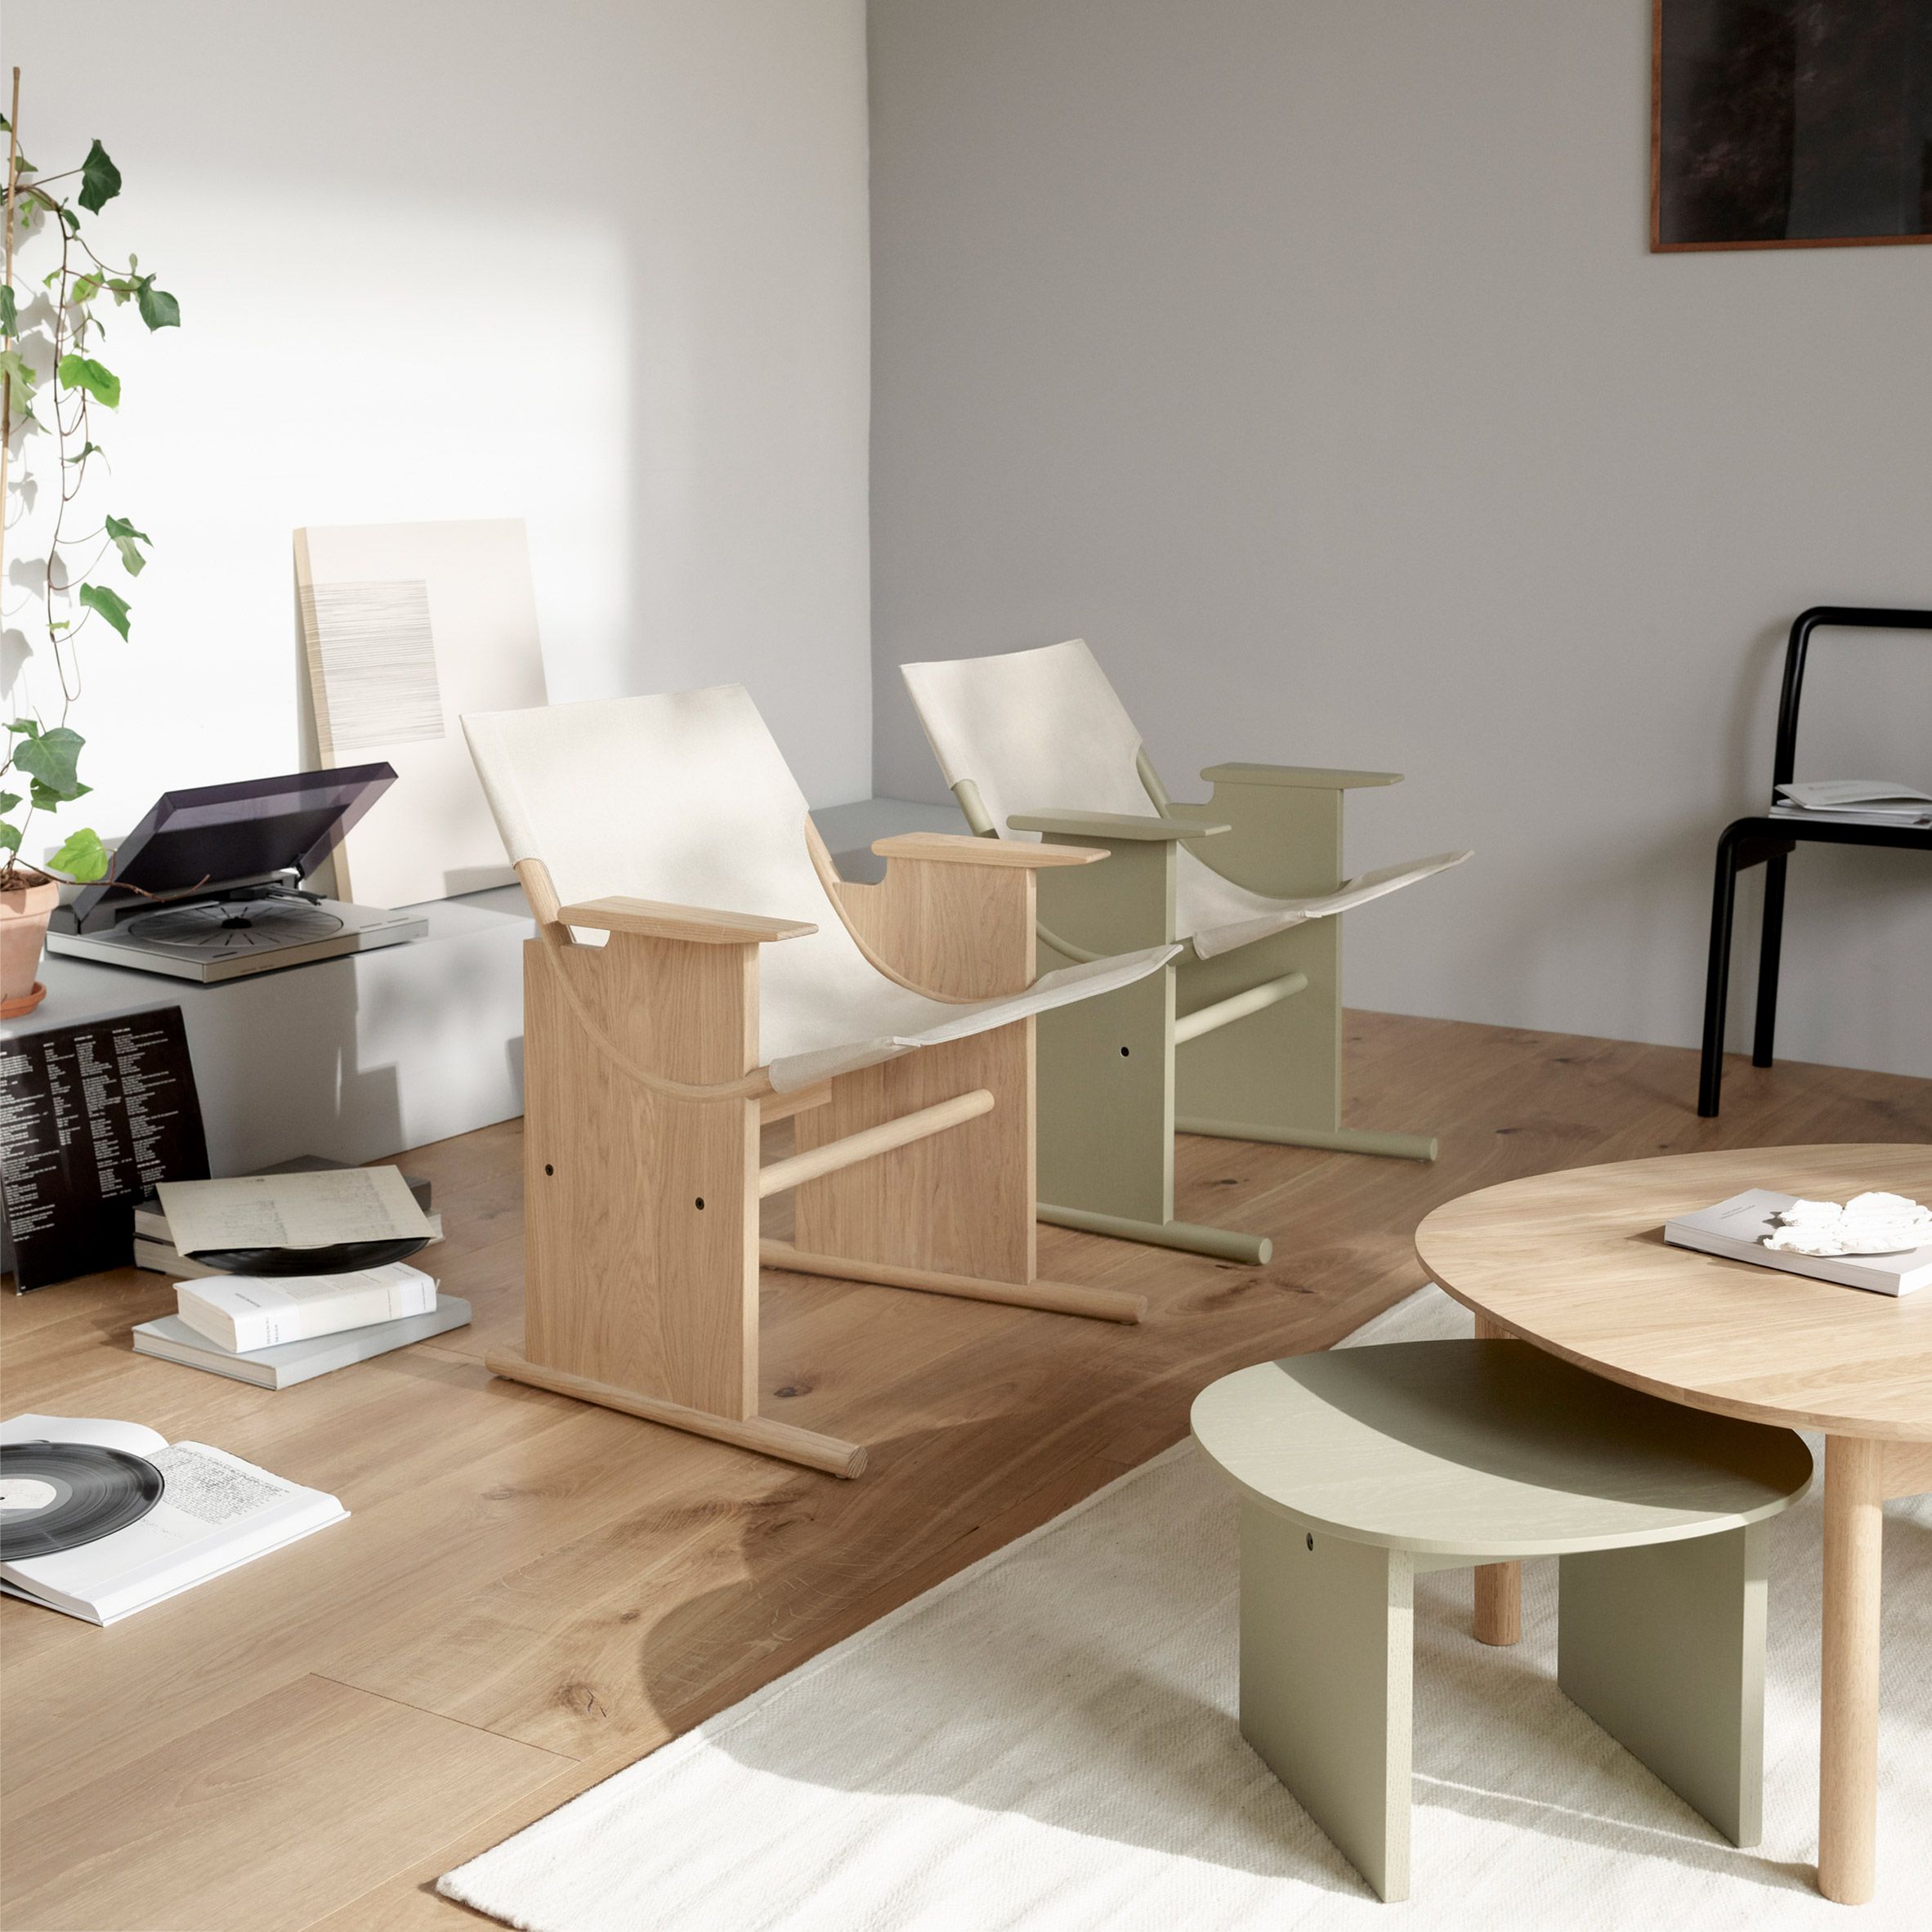 What To Look For When Shopping For Sustainable Furniture